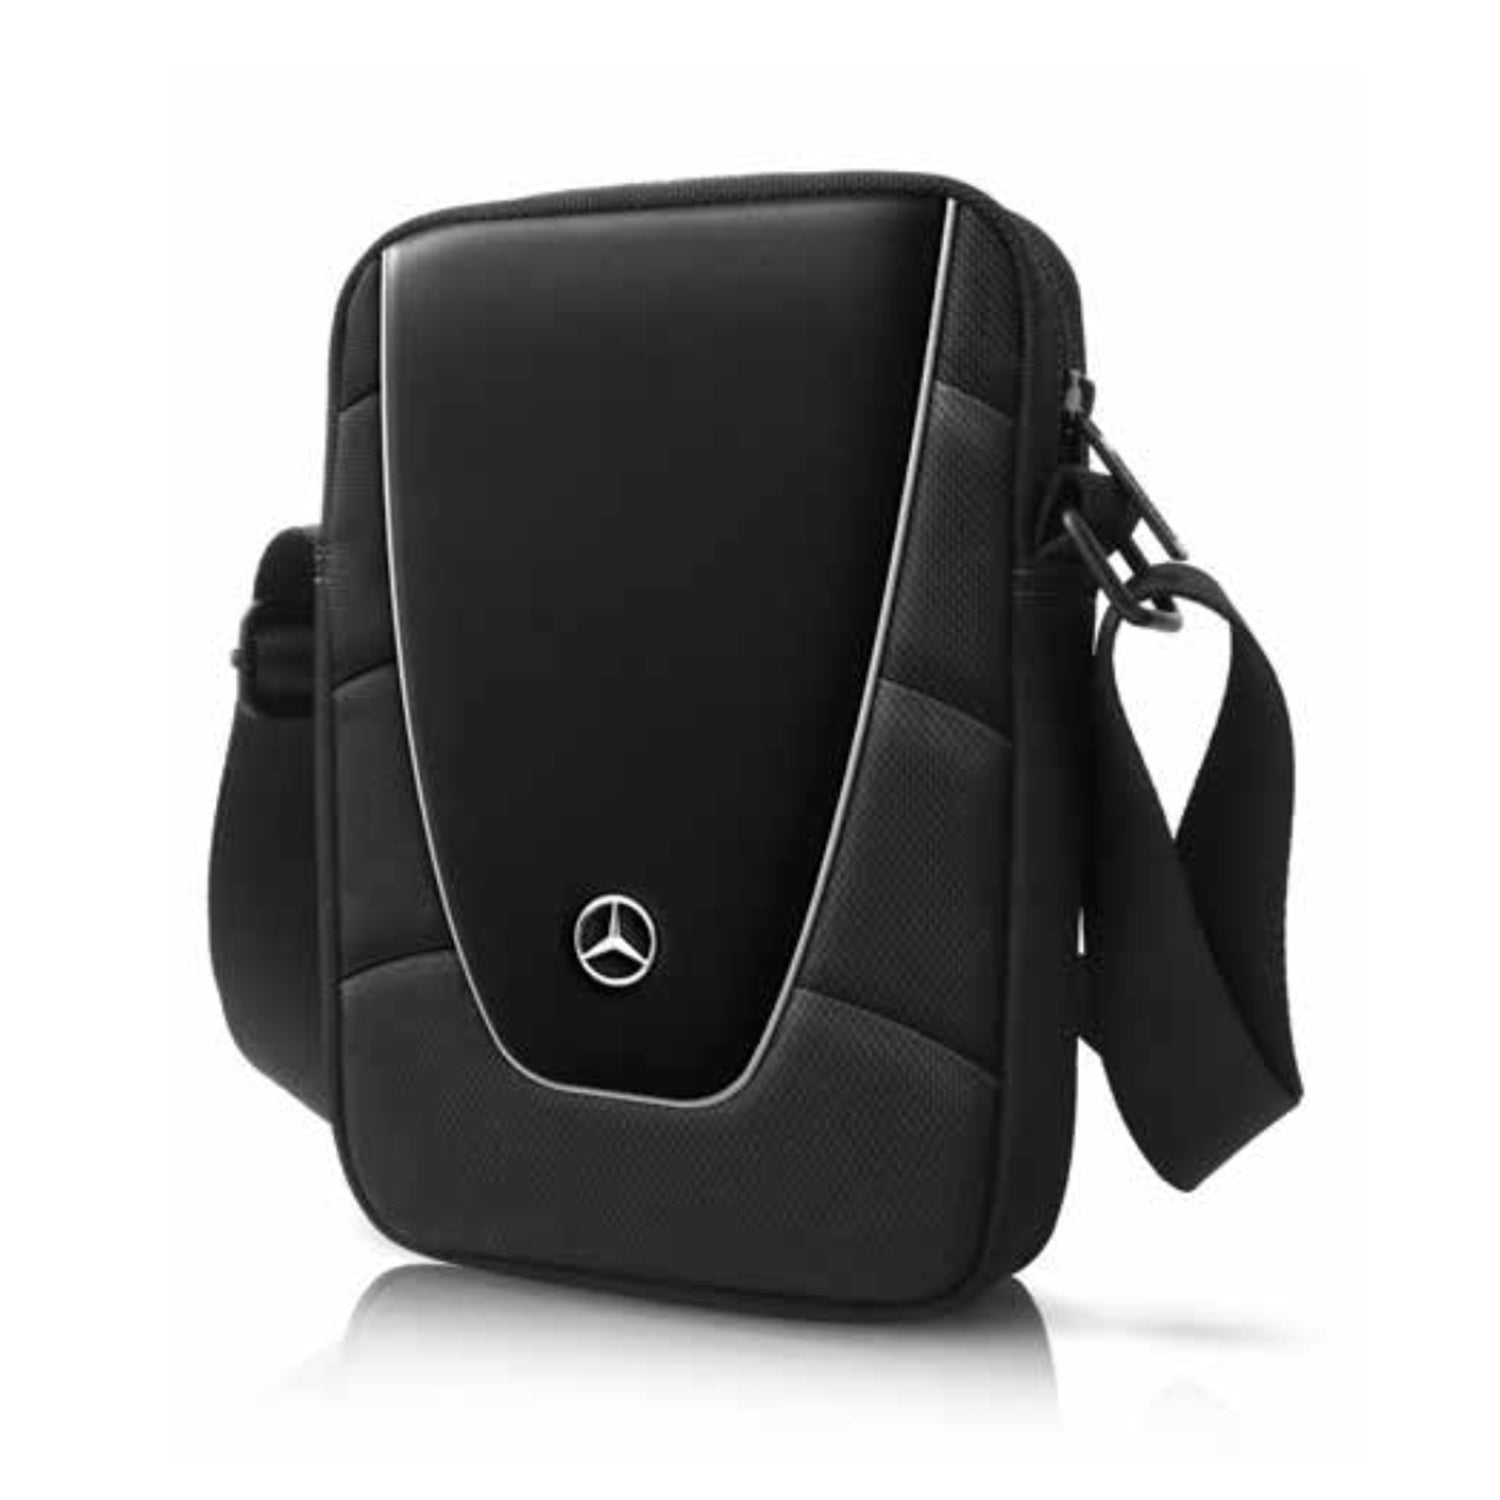 CG Mobile Mercedes-Benz Pattern III Tablet Bag 10, Officially Licensed,  High Quality Design, Easy f